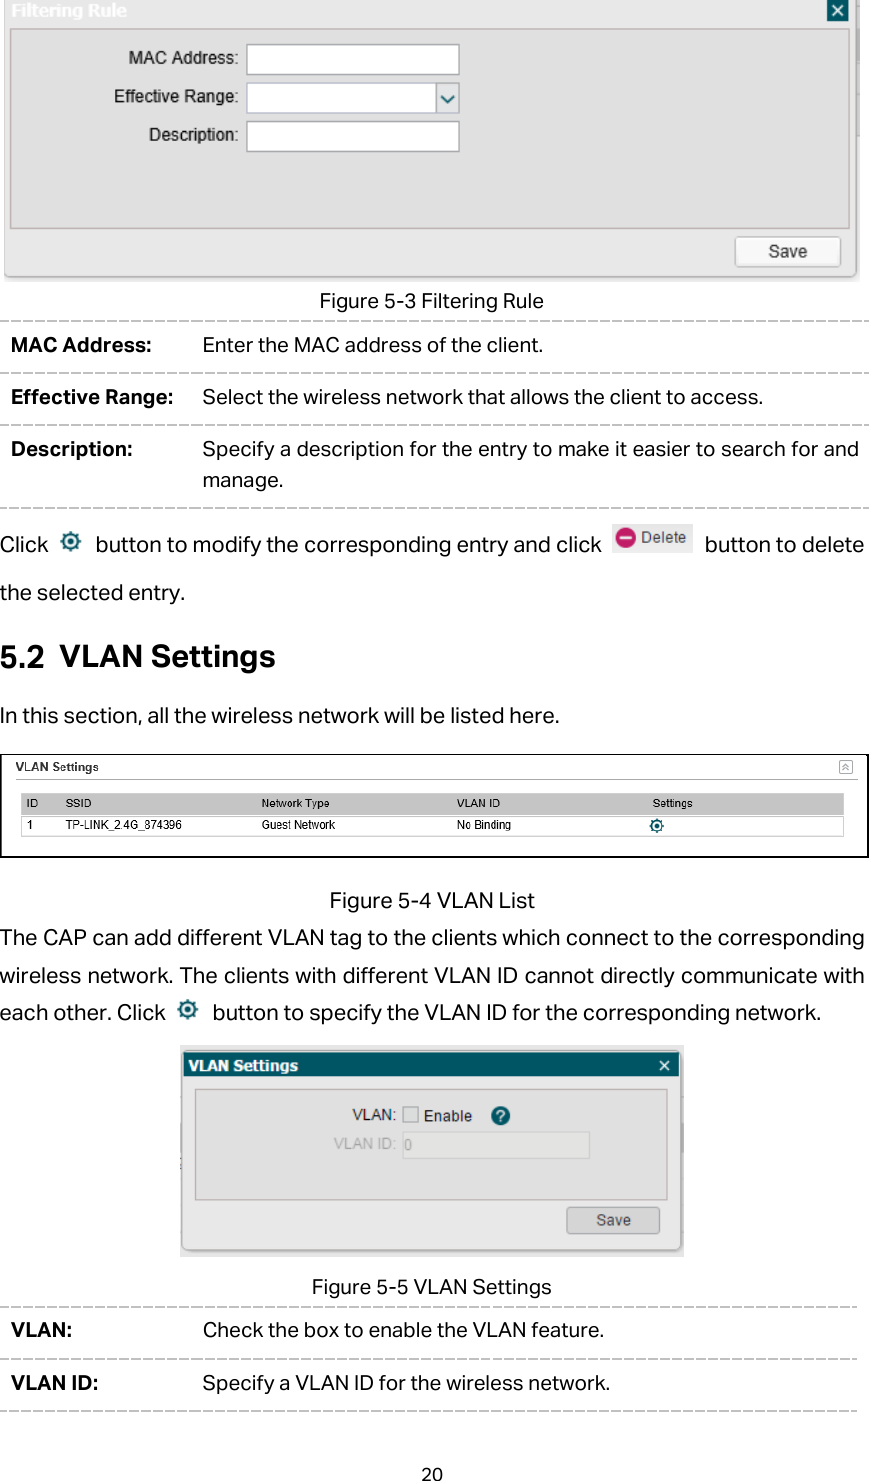  Figure 5-3 Filtering Rule MAC Address: Enter the MAC address of the client.   Effective Range: Select the wireless network that allows the client to access. Description: Specify a description for the entry to make it easier to search for and manage. Click    button to modify the corresponding entry and click   button to delete the selected entry.  VLAN Settings In this section, all the wireless network will be listed here.  Figure 5-4 VLAN List The CAP can add different VLAN tag to the clients which connect to the corresponding wireless network. The clients with different VLAN ID cannot directly communicate with each other. Click   button to specify the VLAN ID for the corresponding network.  Figure 5-5 VLAN Settings VLAN:  Check the box to enable the VLAN feature. VLAN ID:  Specify a VLAN ID for the wireless network. 20 